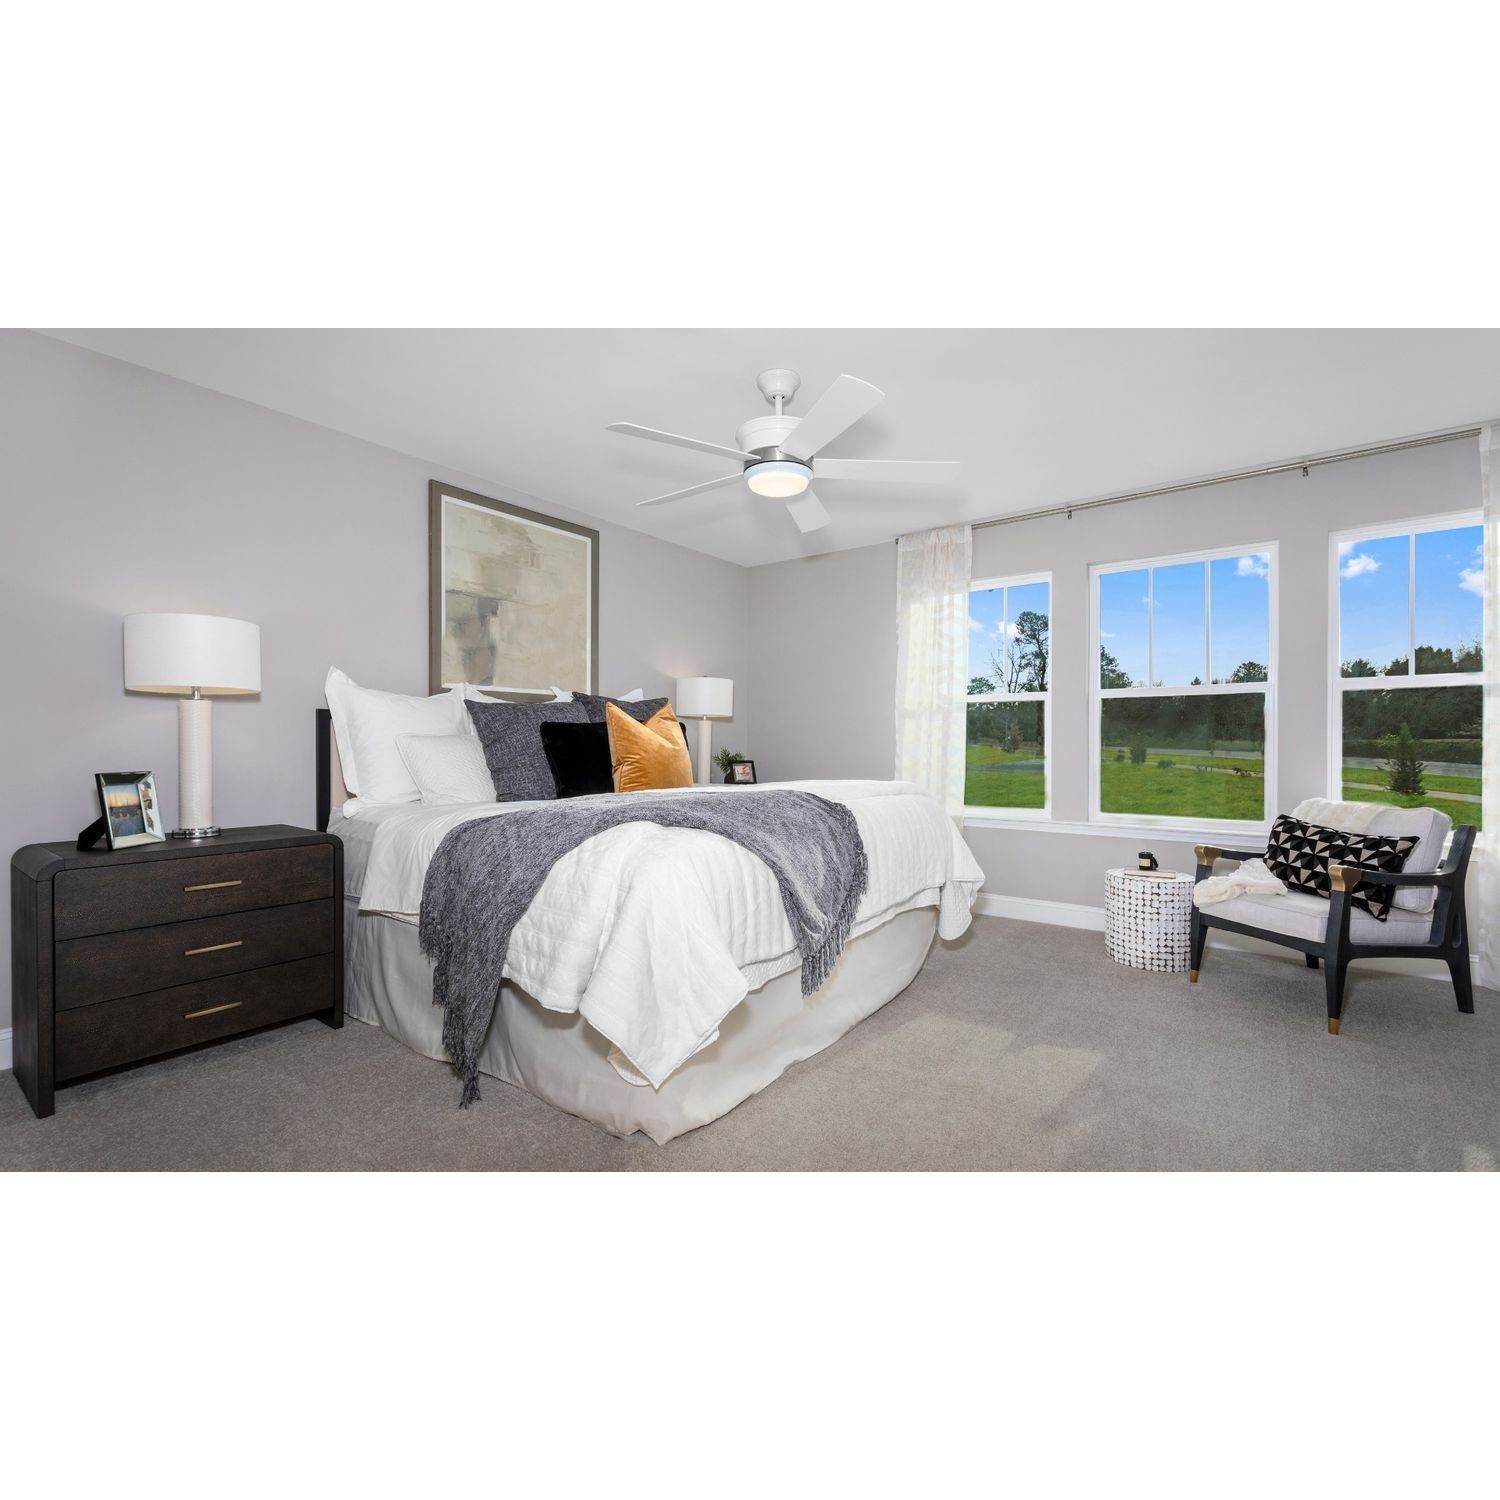 6. Meadow View xây dựng tại 42 Channel Drop Drive, Clayton, NC 27520